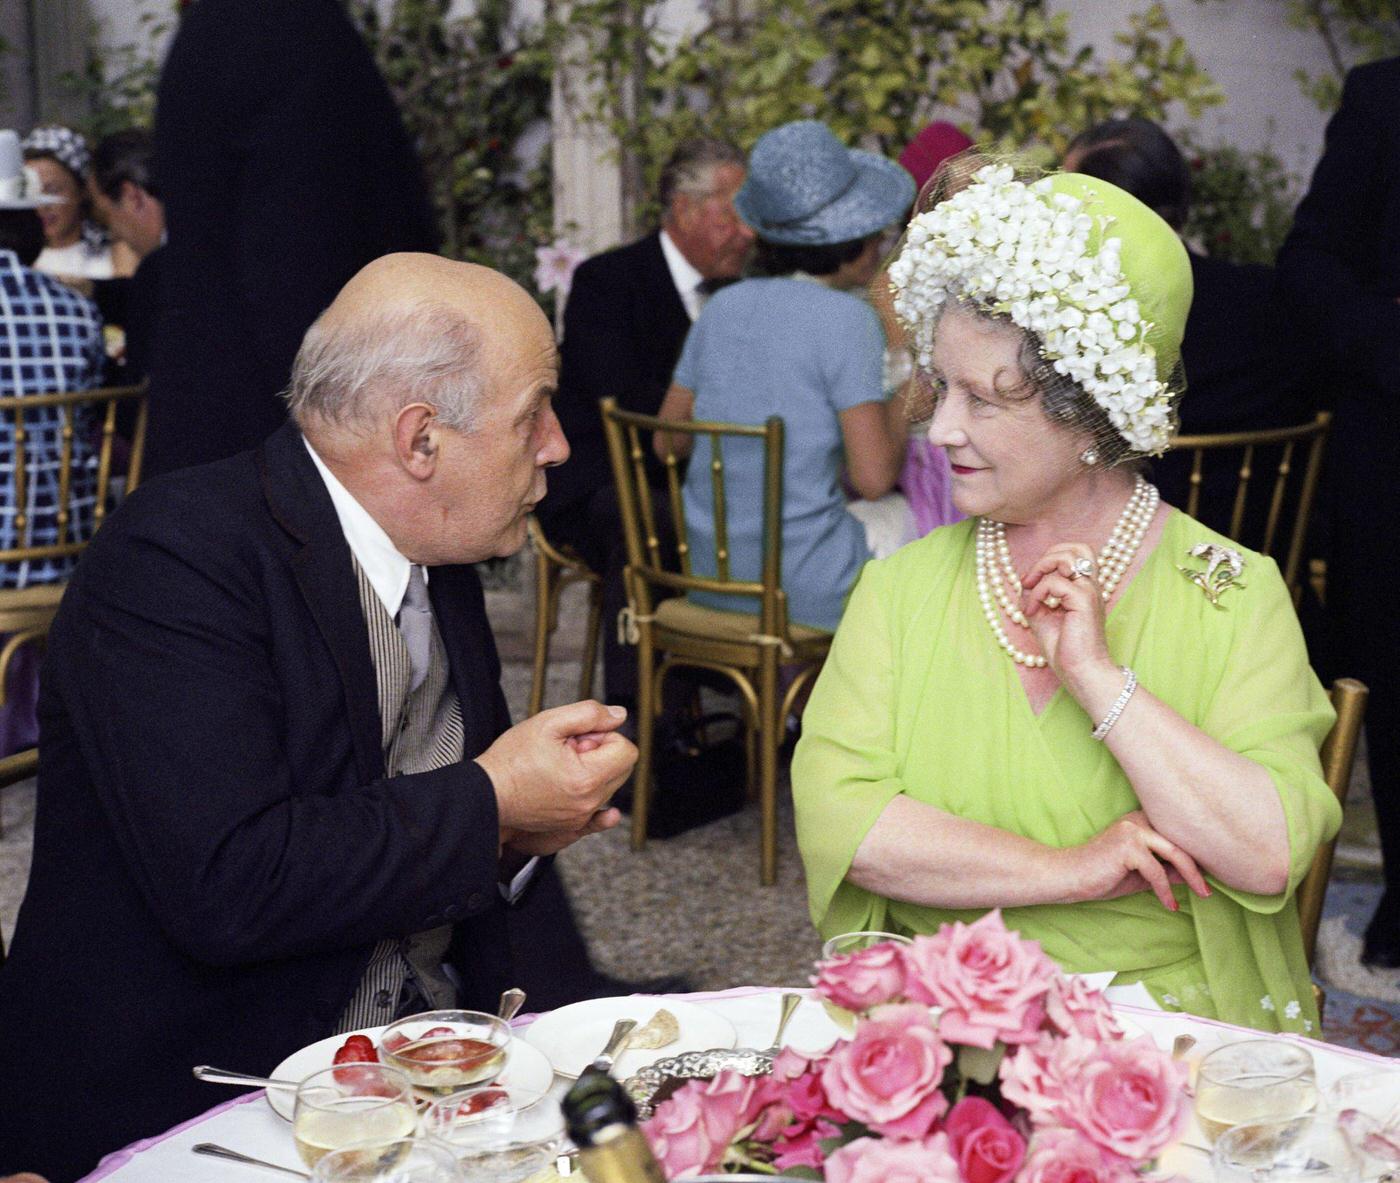 Queen Elizabeth The Queen Mother and poet John Betjeman at the wedding of Sheran Cazalet and Simon Hornby at Fairlawn in Sussex, 1968.